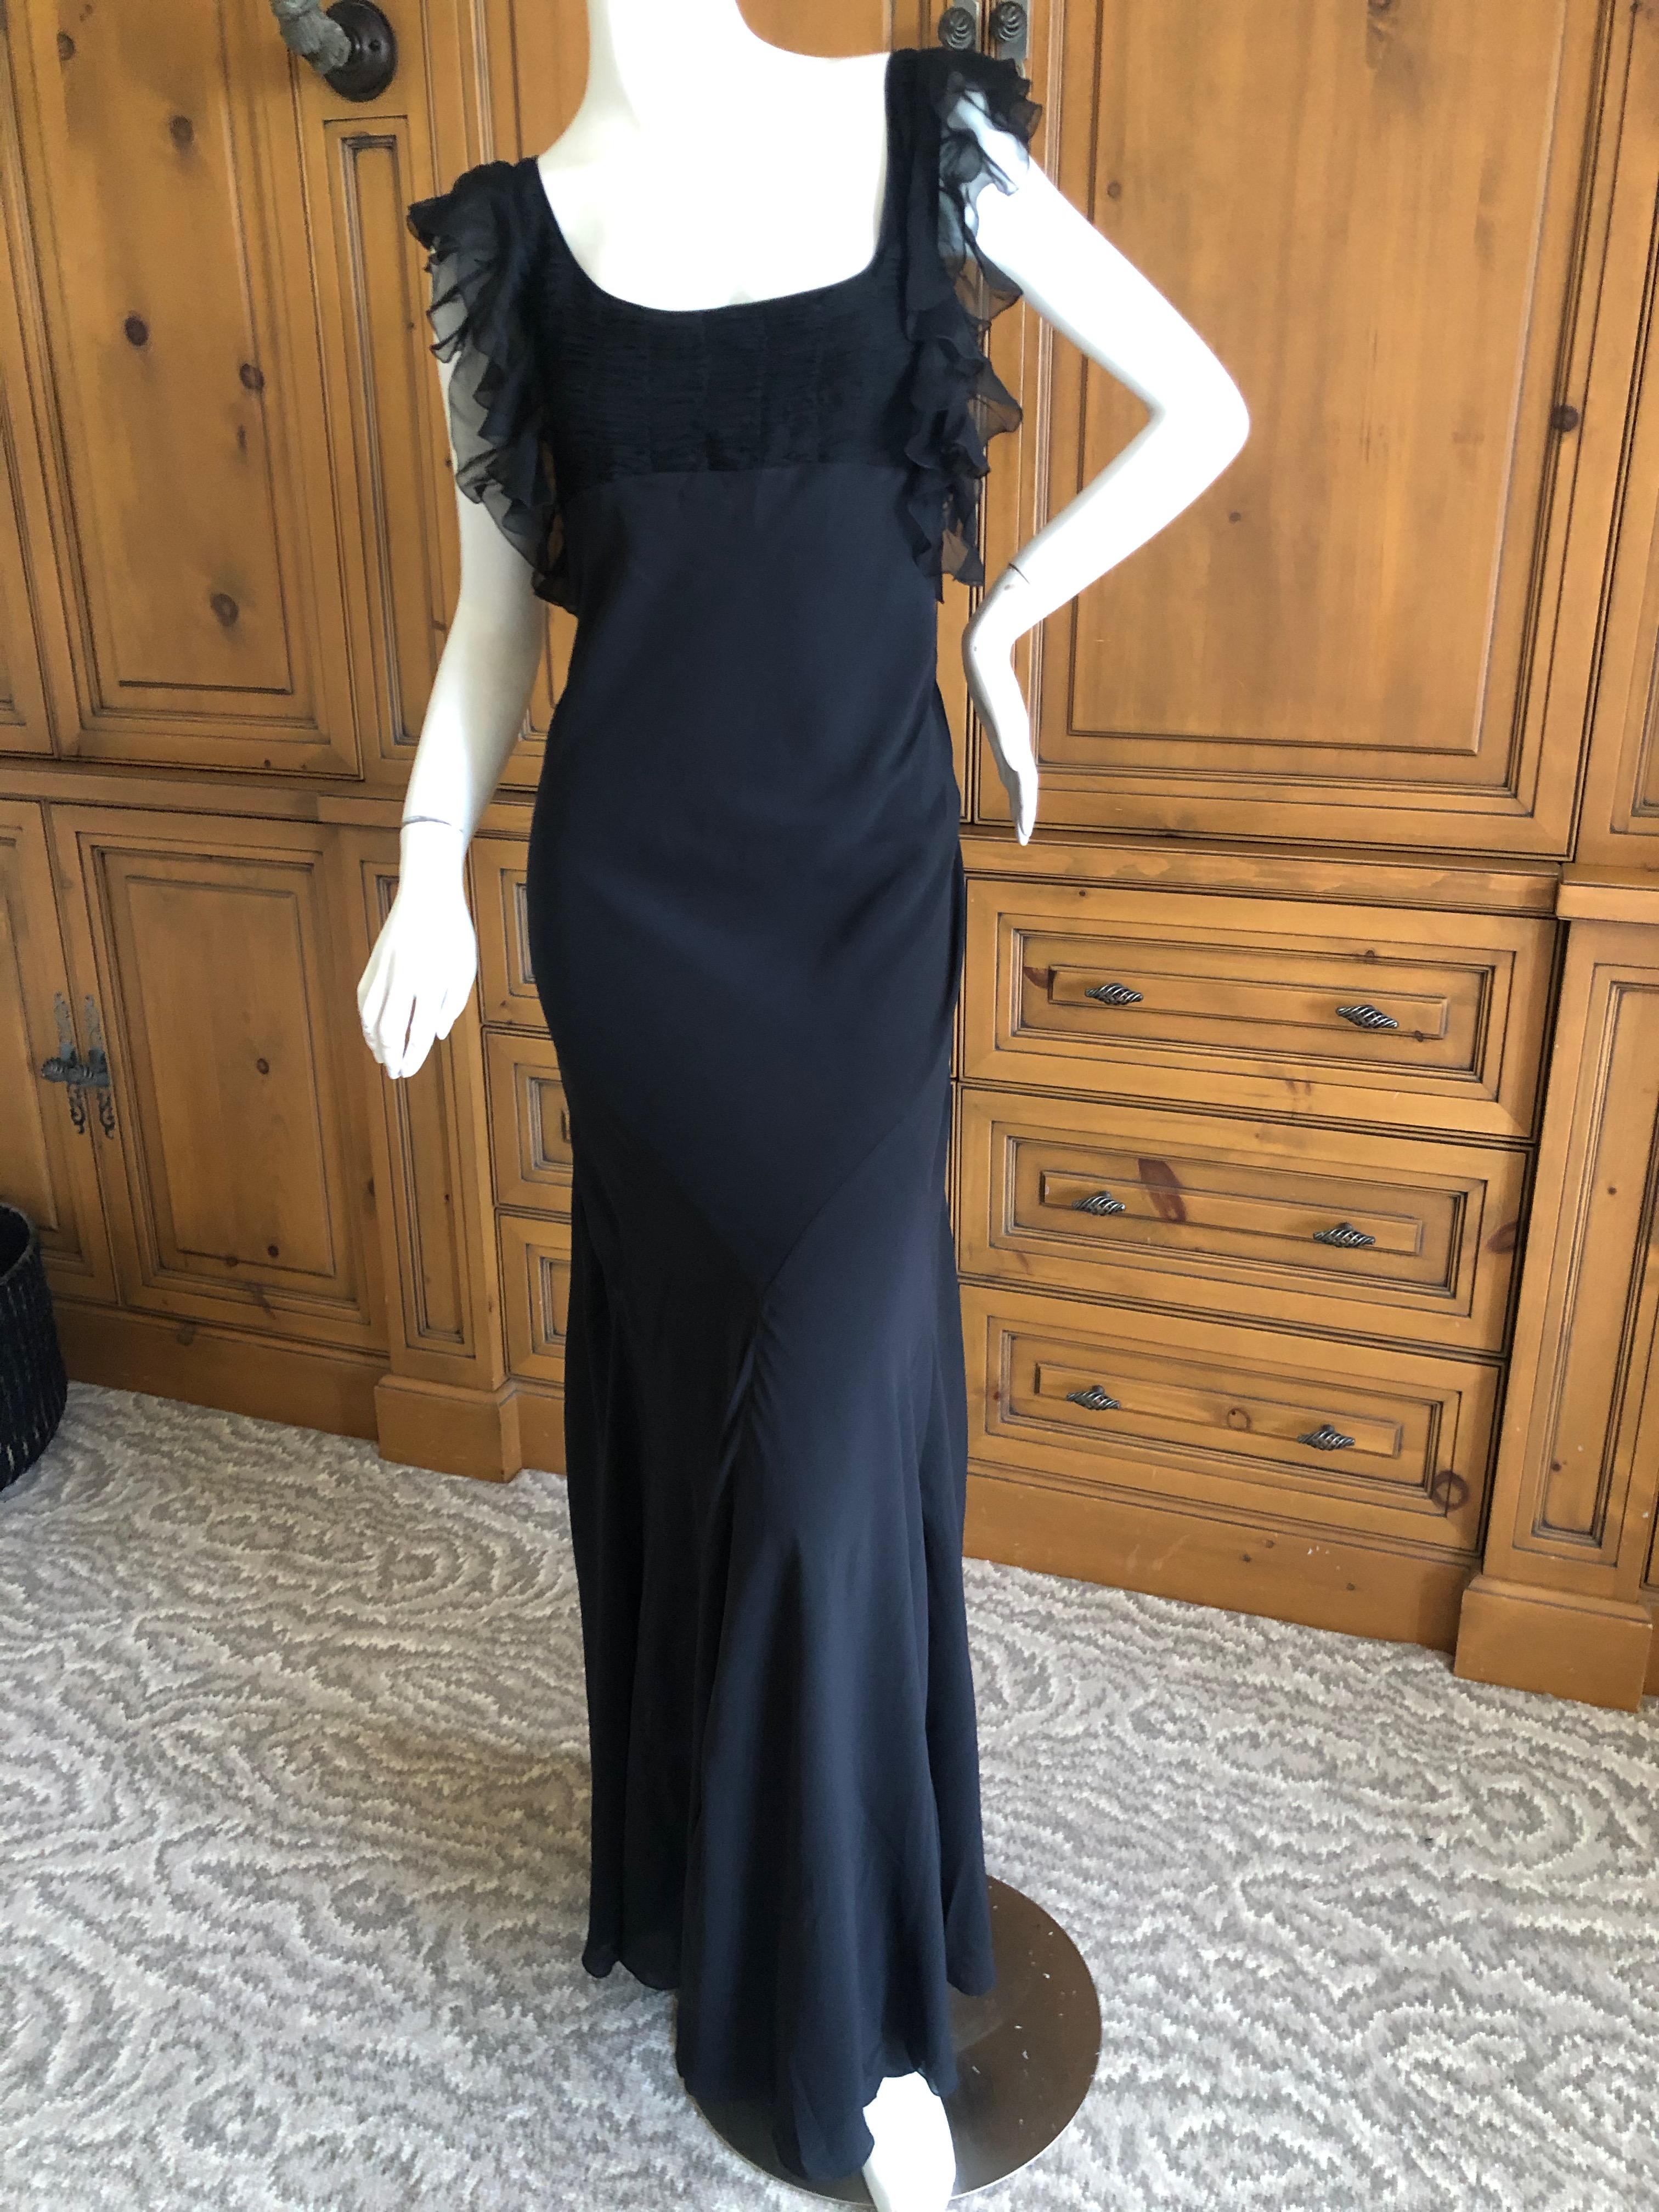 John Galliano Vintage Black Bias Cut Empire Style Evening Dress with Ruffles.
This is so pretty but difficult to photograph the black details.
Pin tucking at bust is so pretty.
 Size 42
 Bust 37